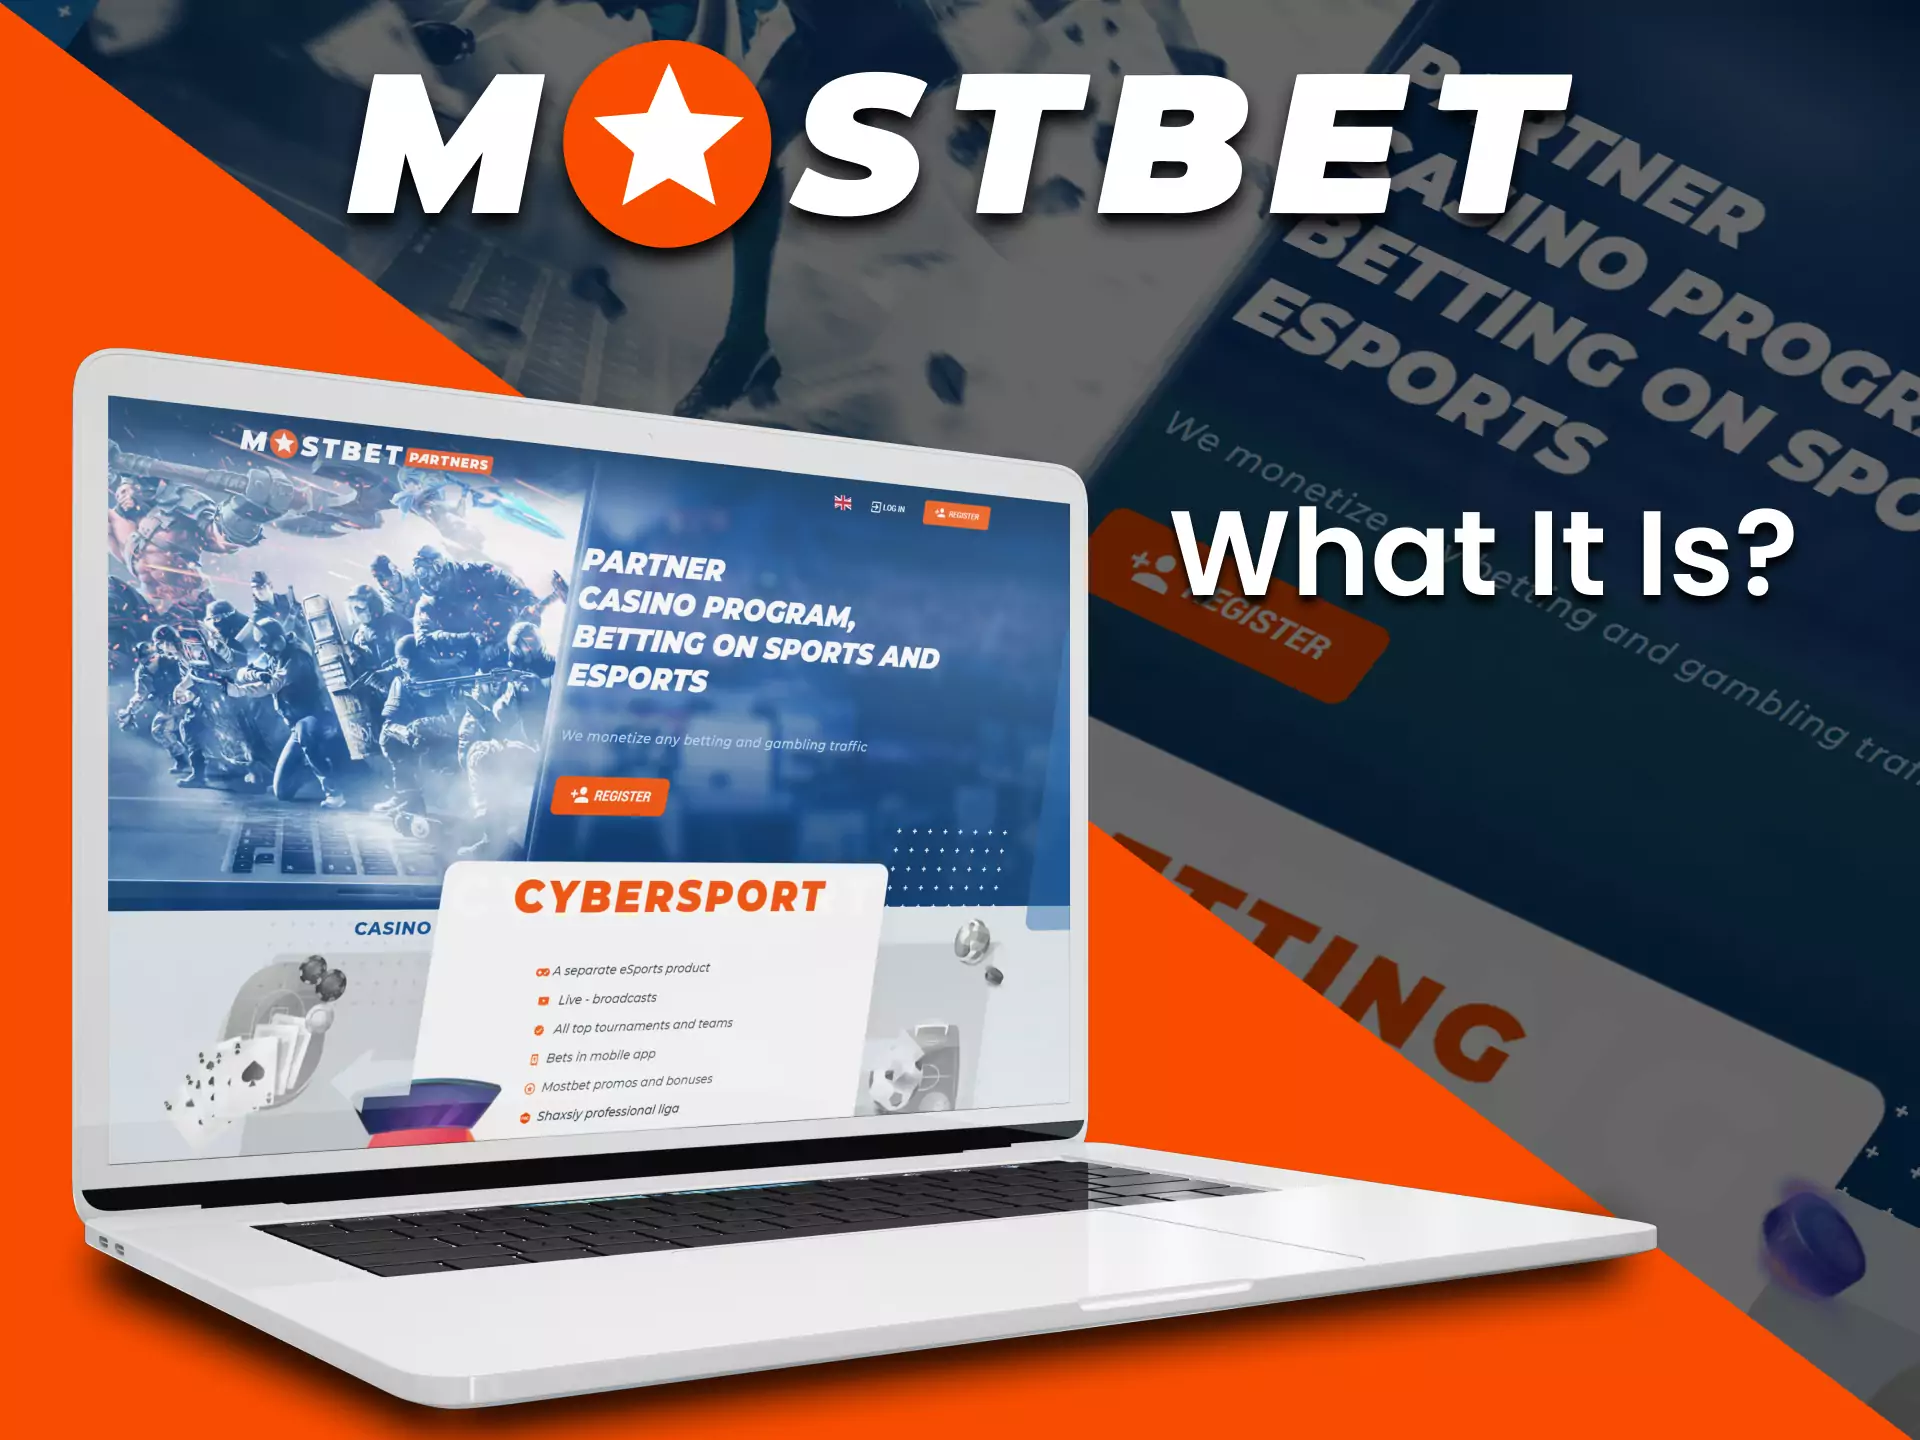 15 No Cost Ways To Get More With Mostbet review